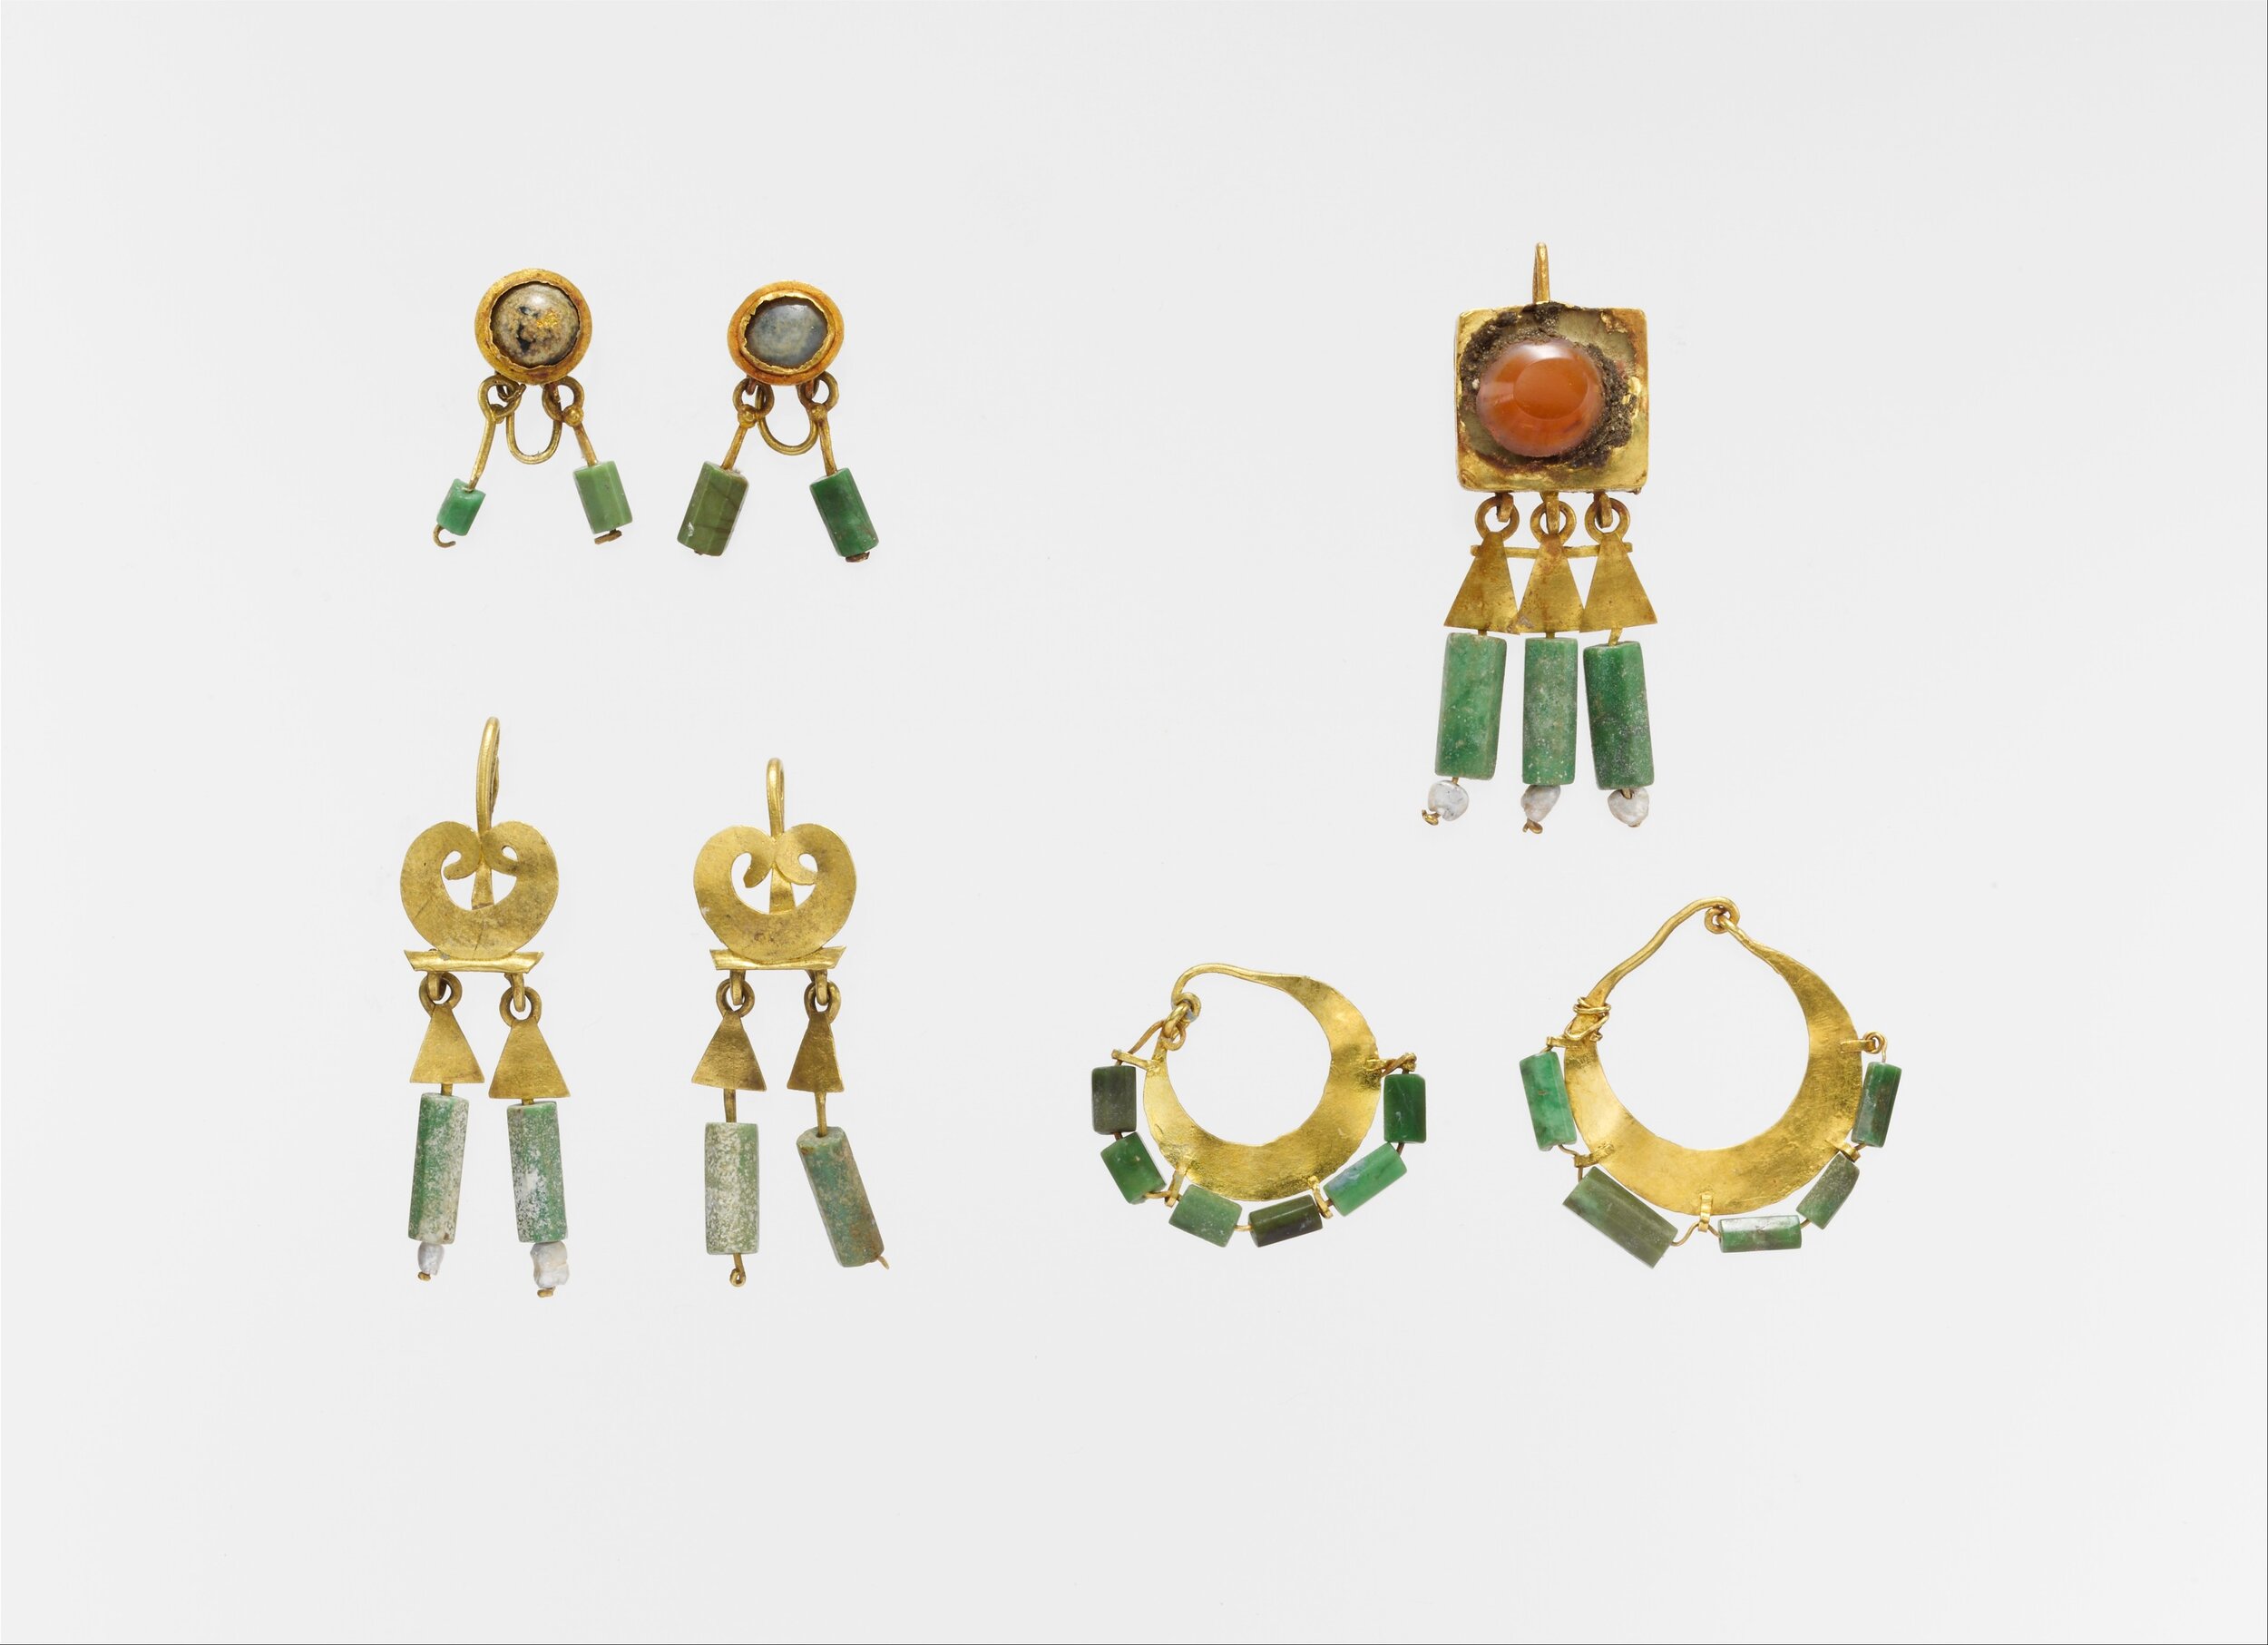 I would 100% wear these now...how well they've aged! Roman 3rd century earrings, courtesy of the MET